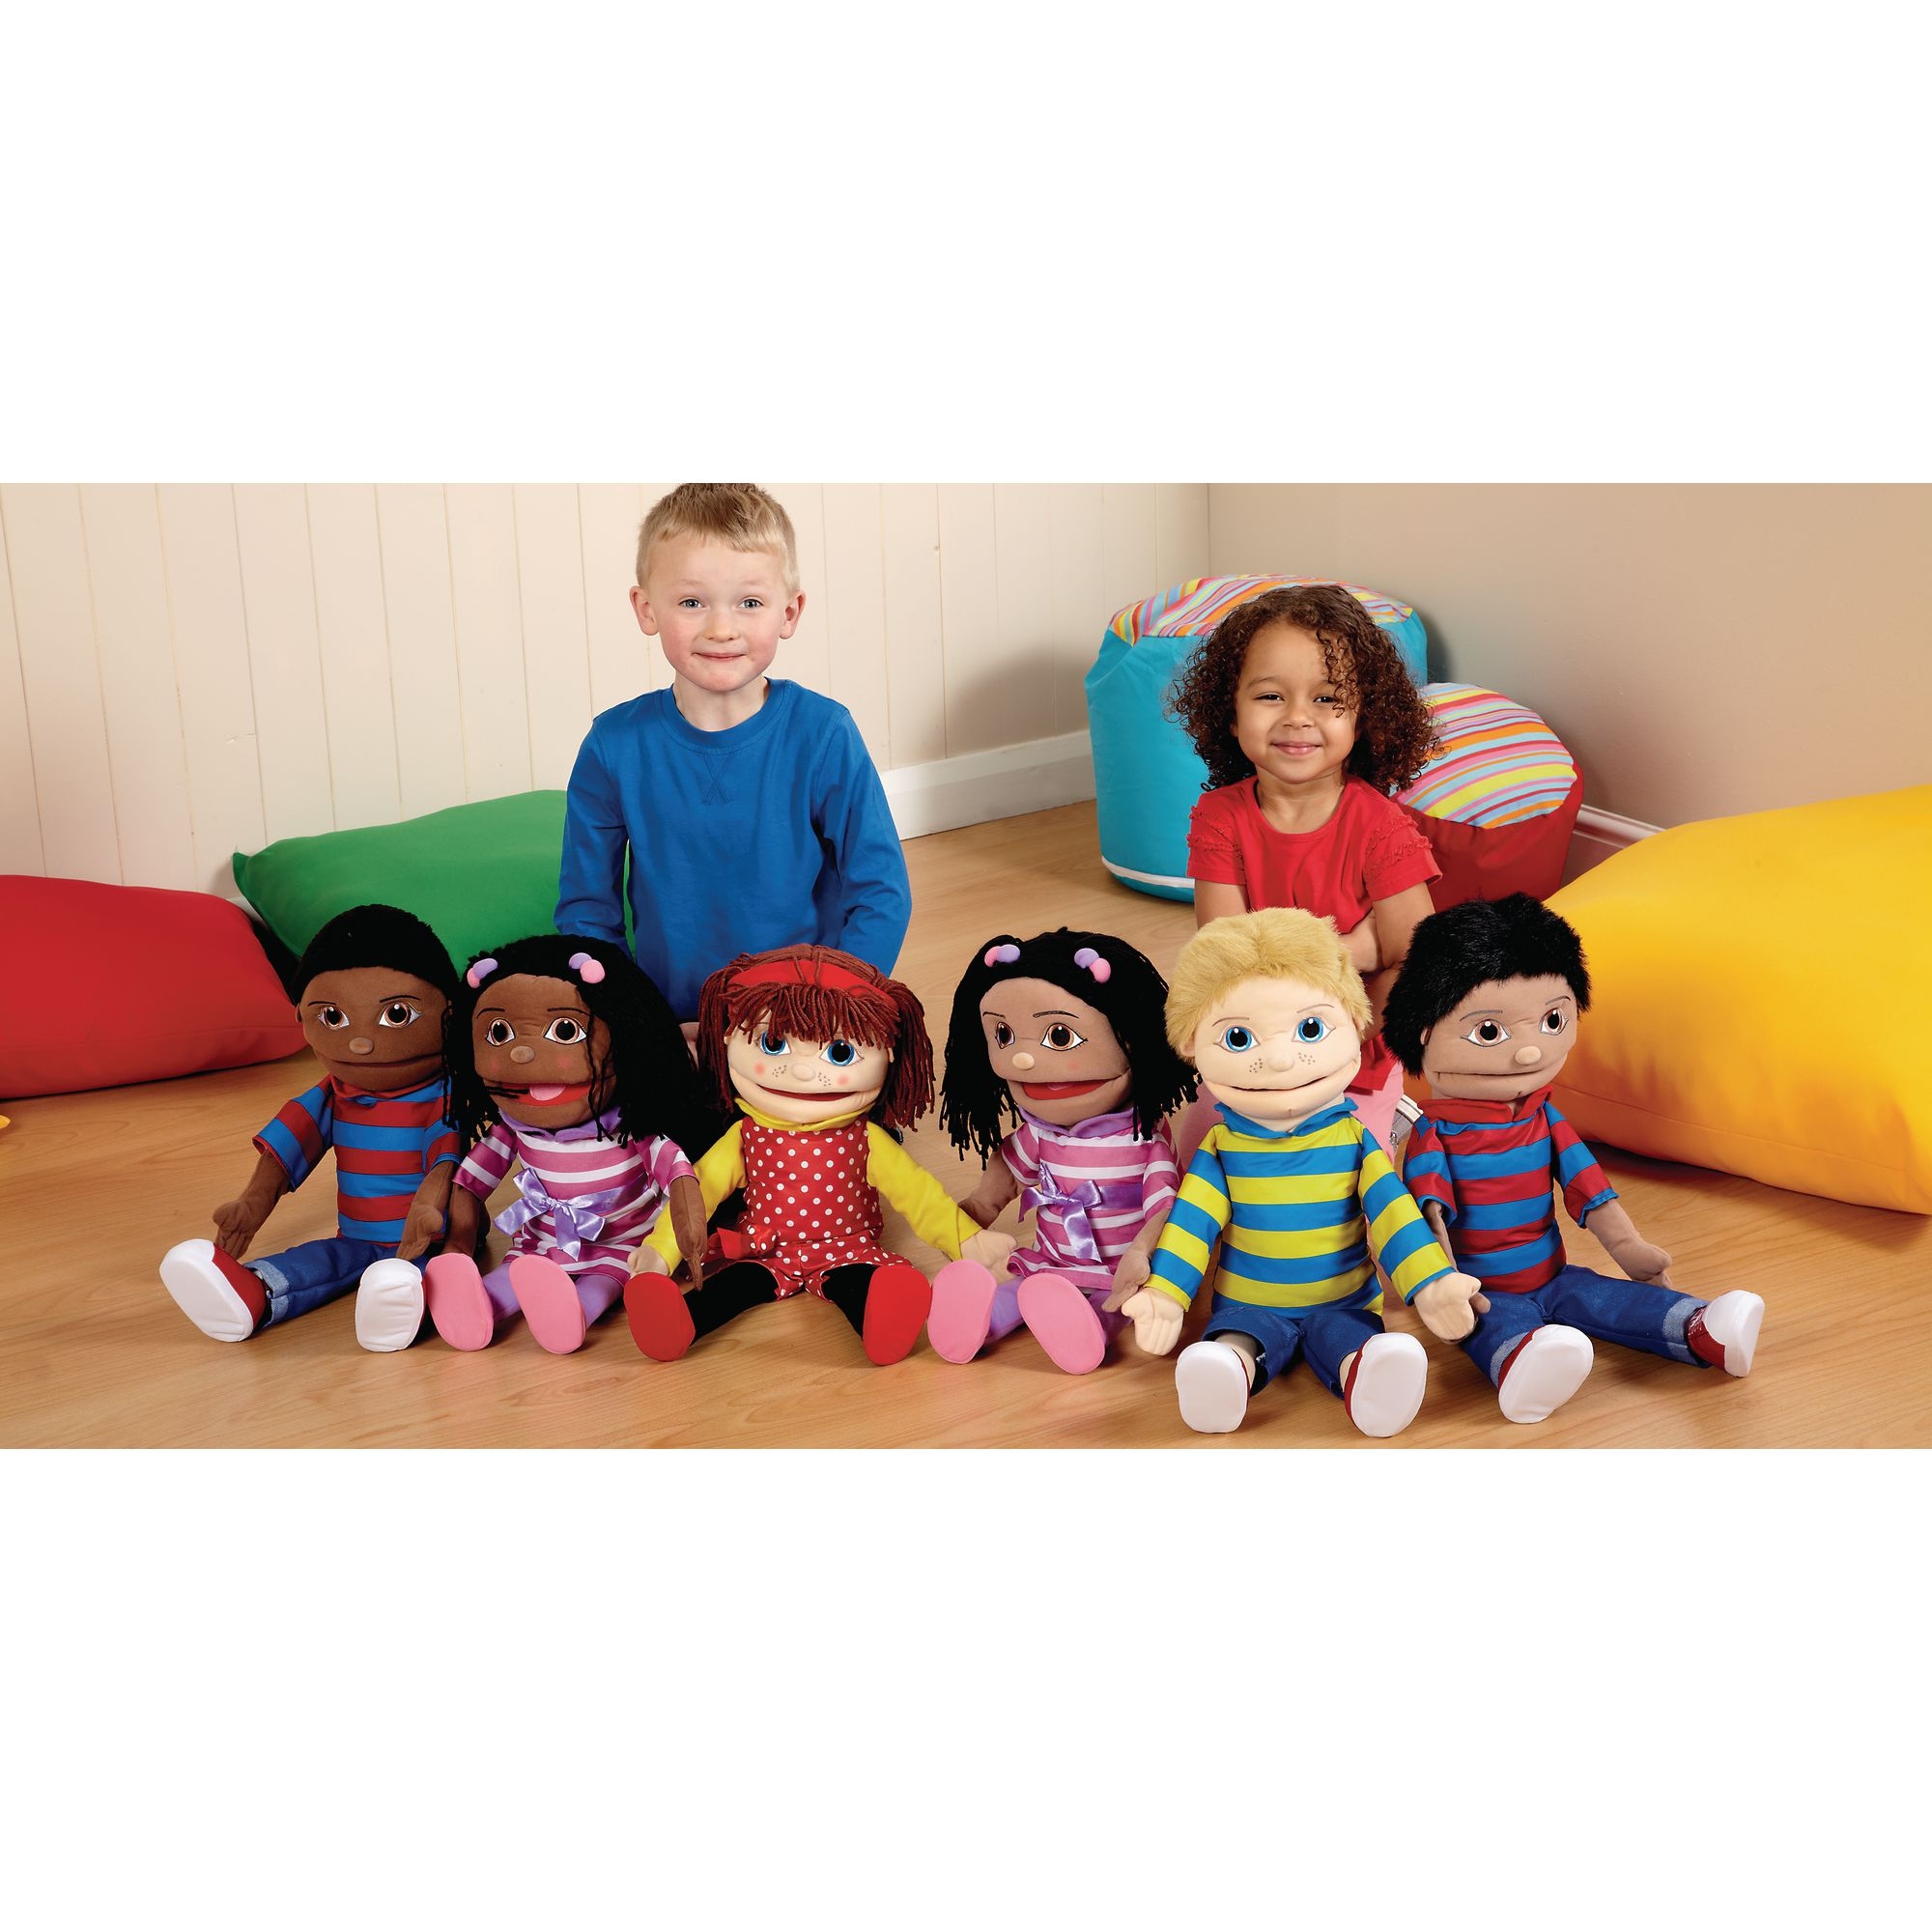 Giant Ethnic Hand Puppets - Pack of 6